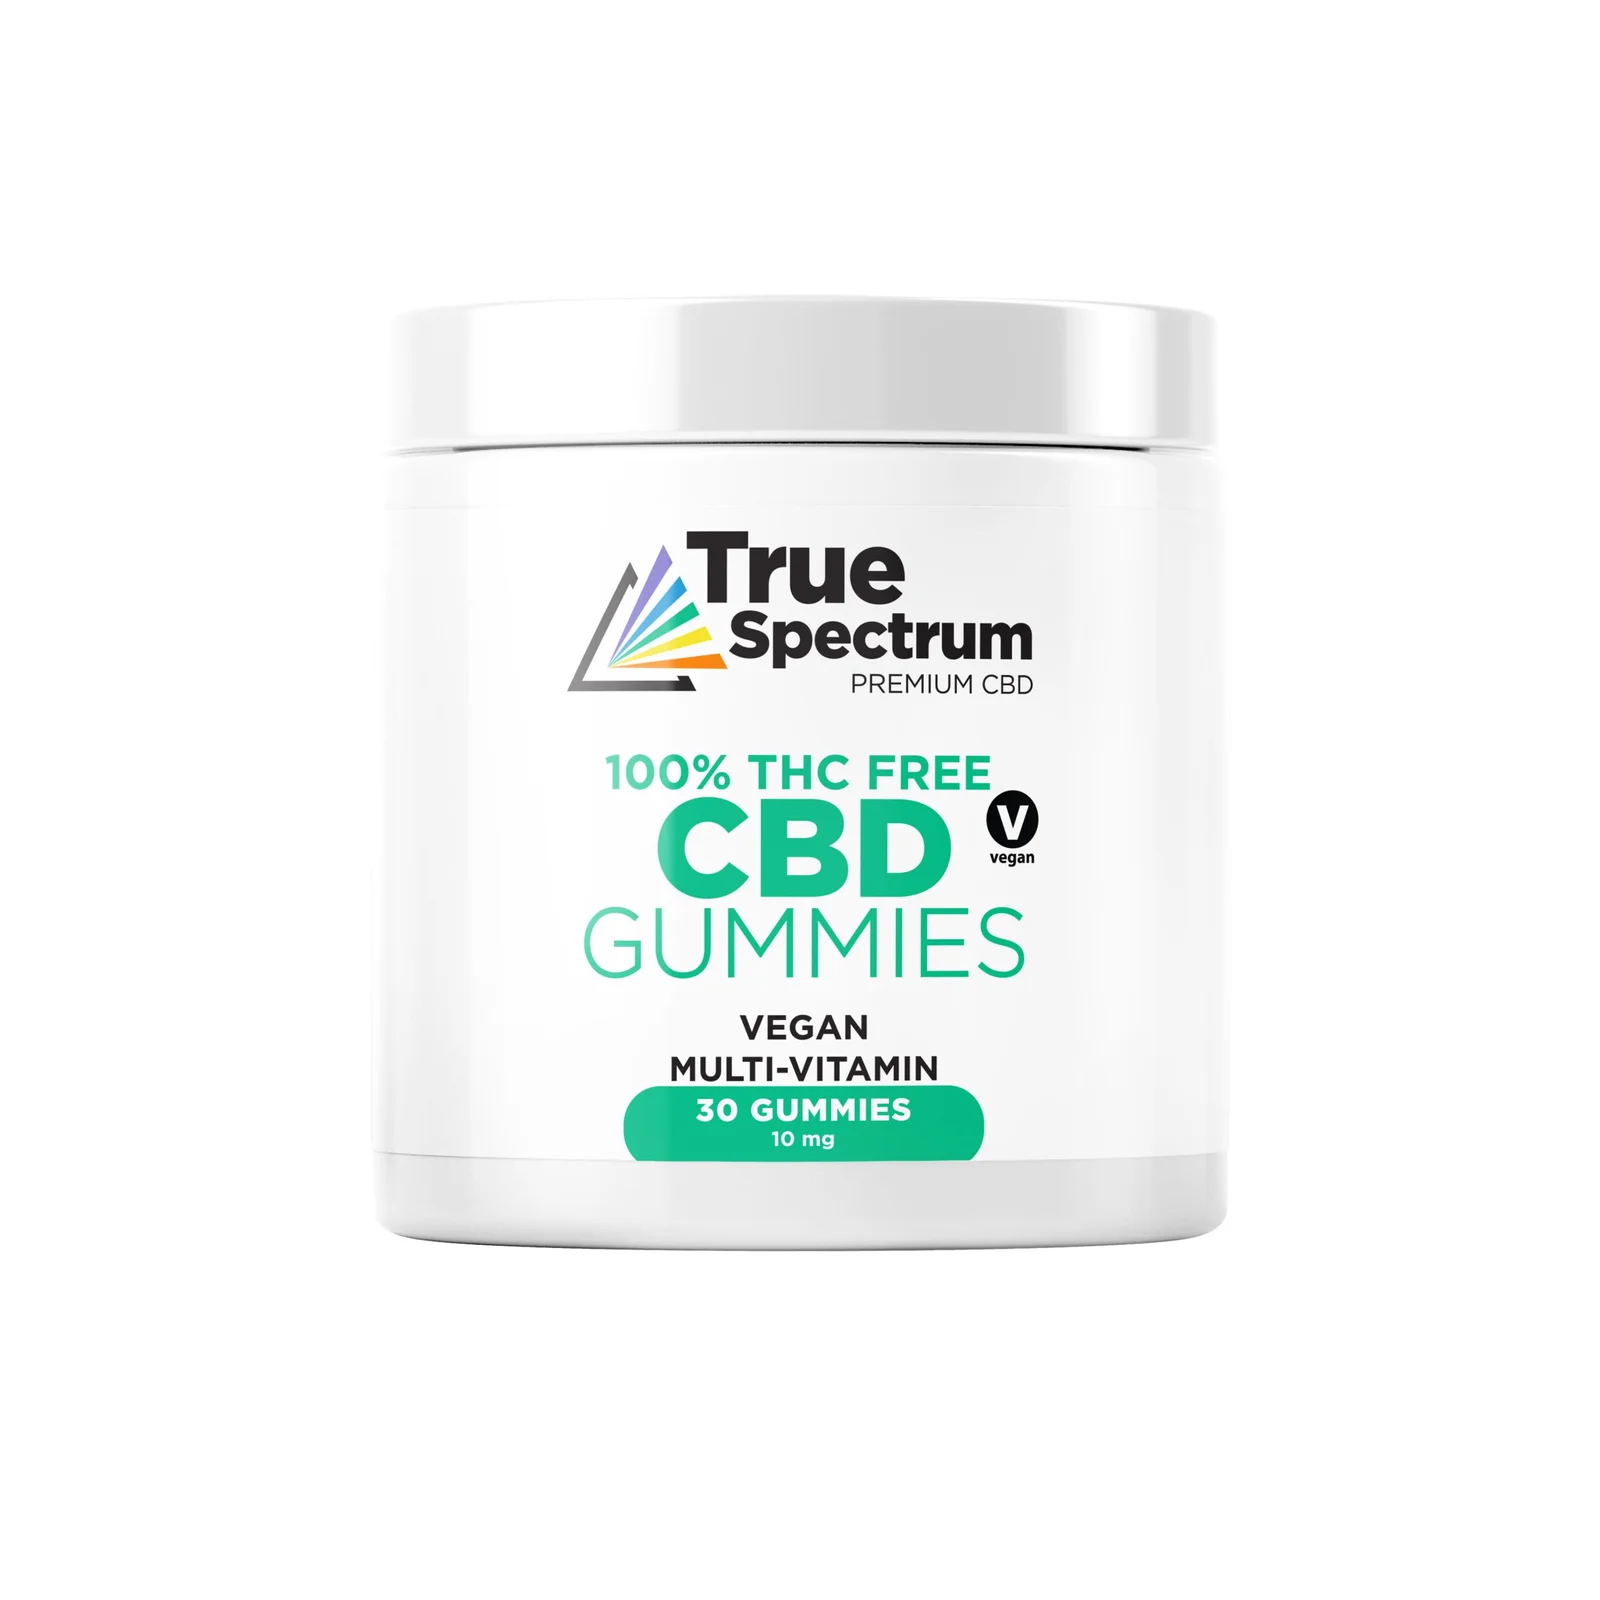 A Comprehensive Review of the Top CBD Edibles By My True Spectrum